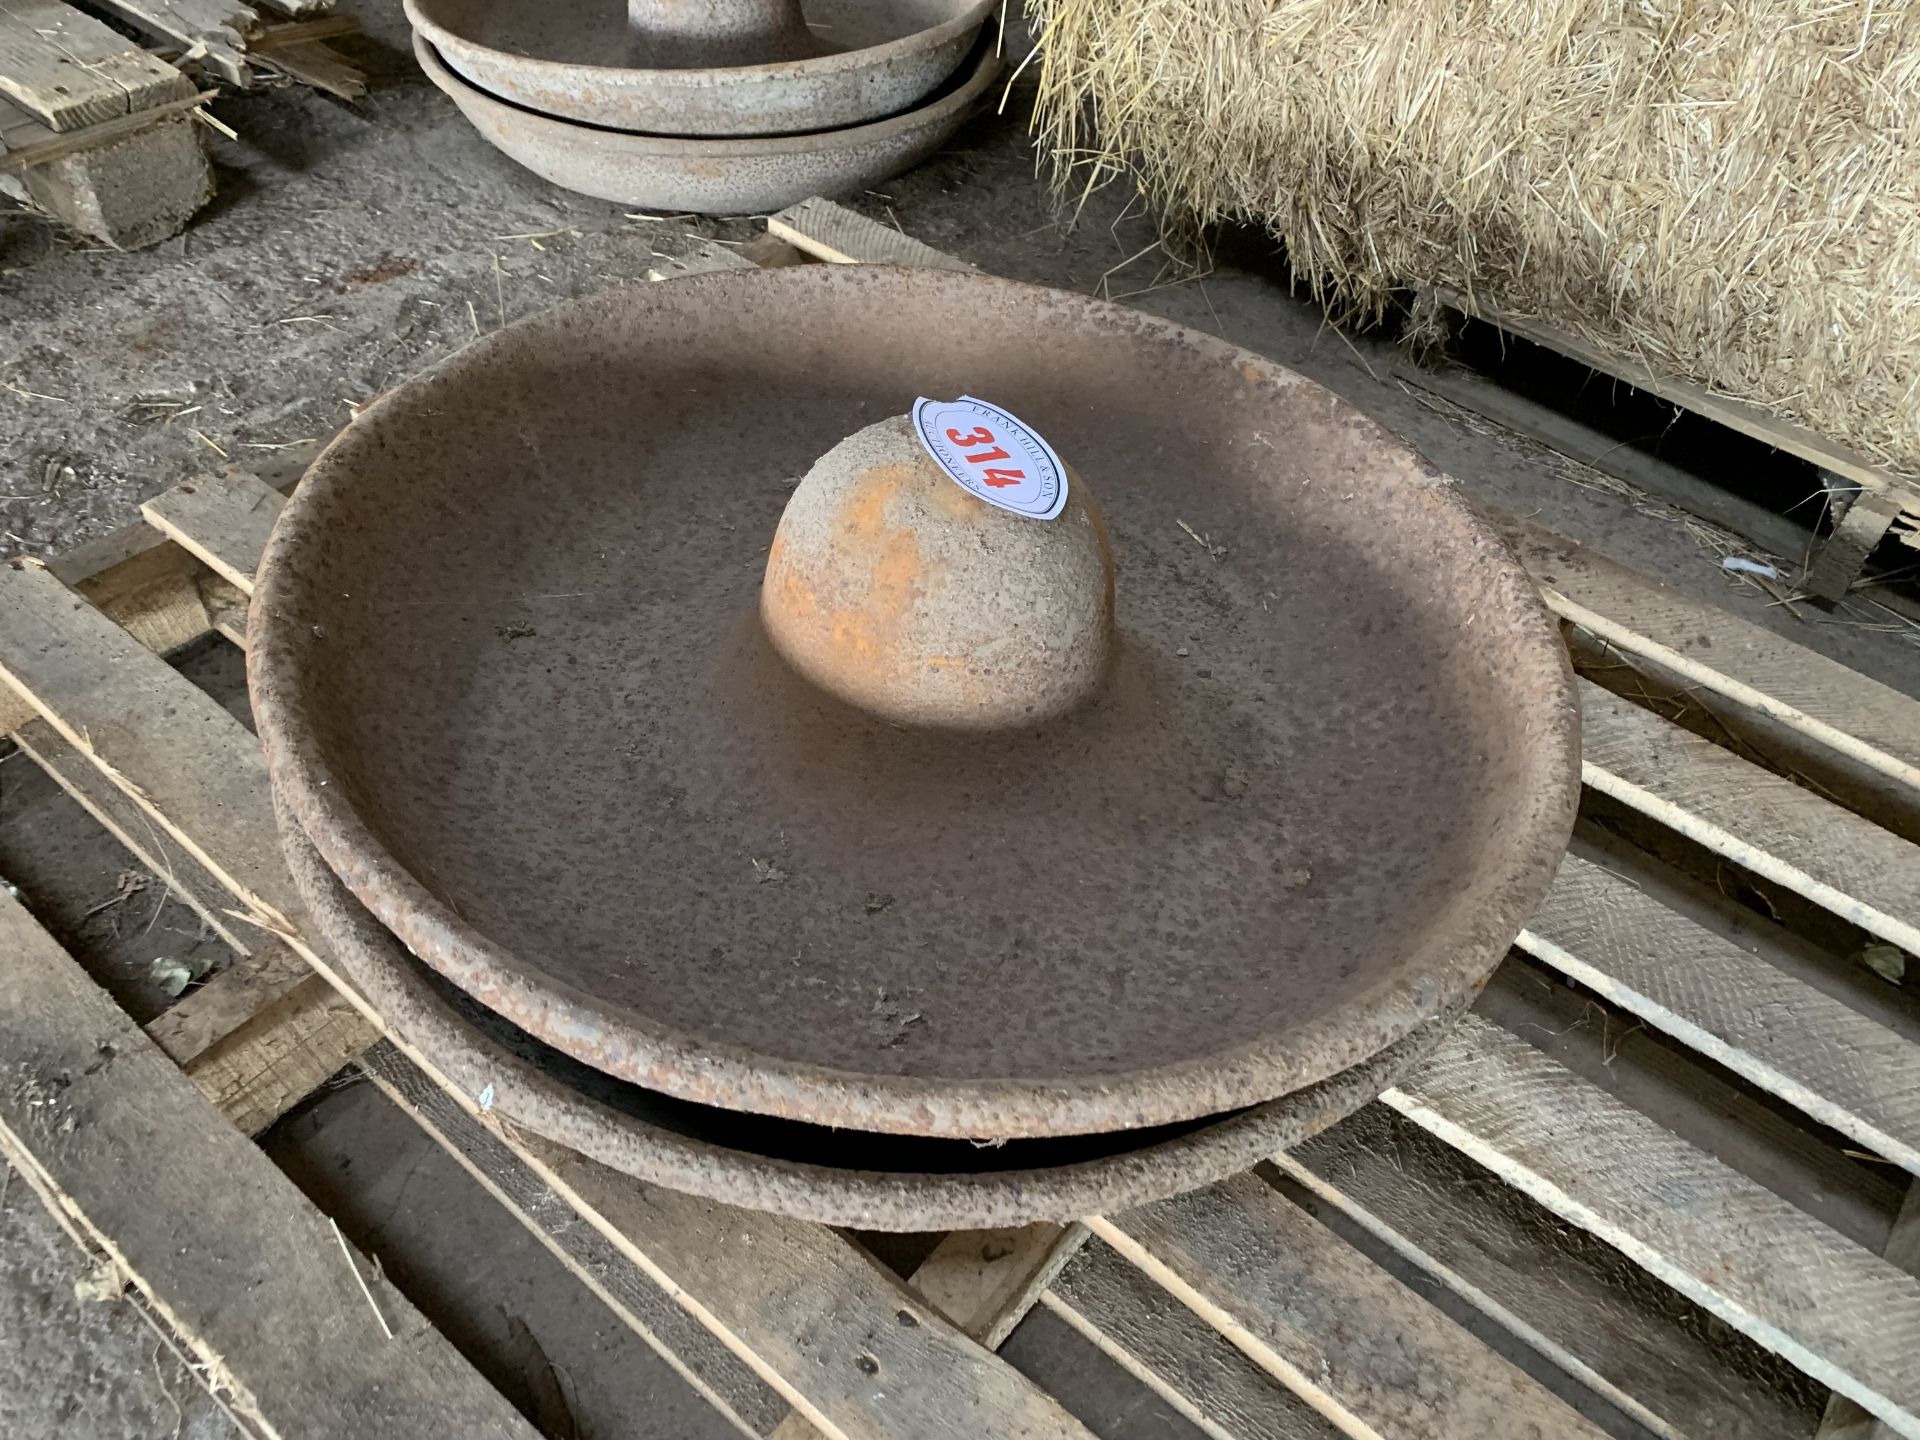 NO VAT Pair of mexican hat feeders